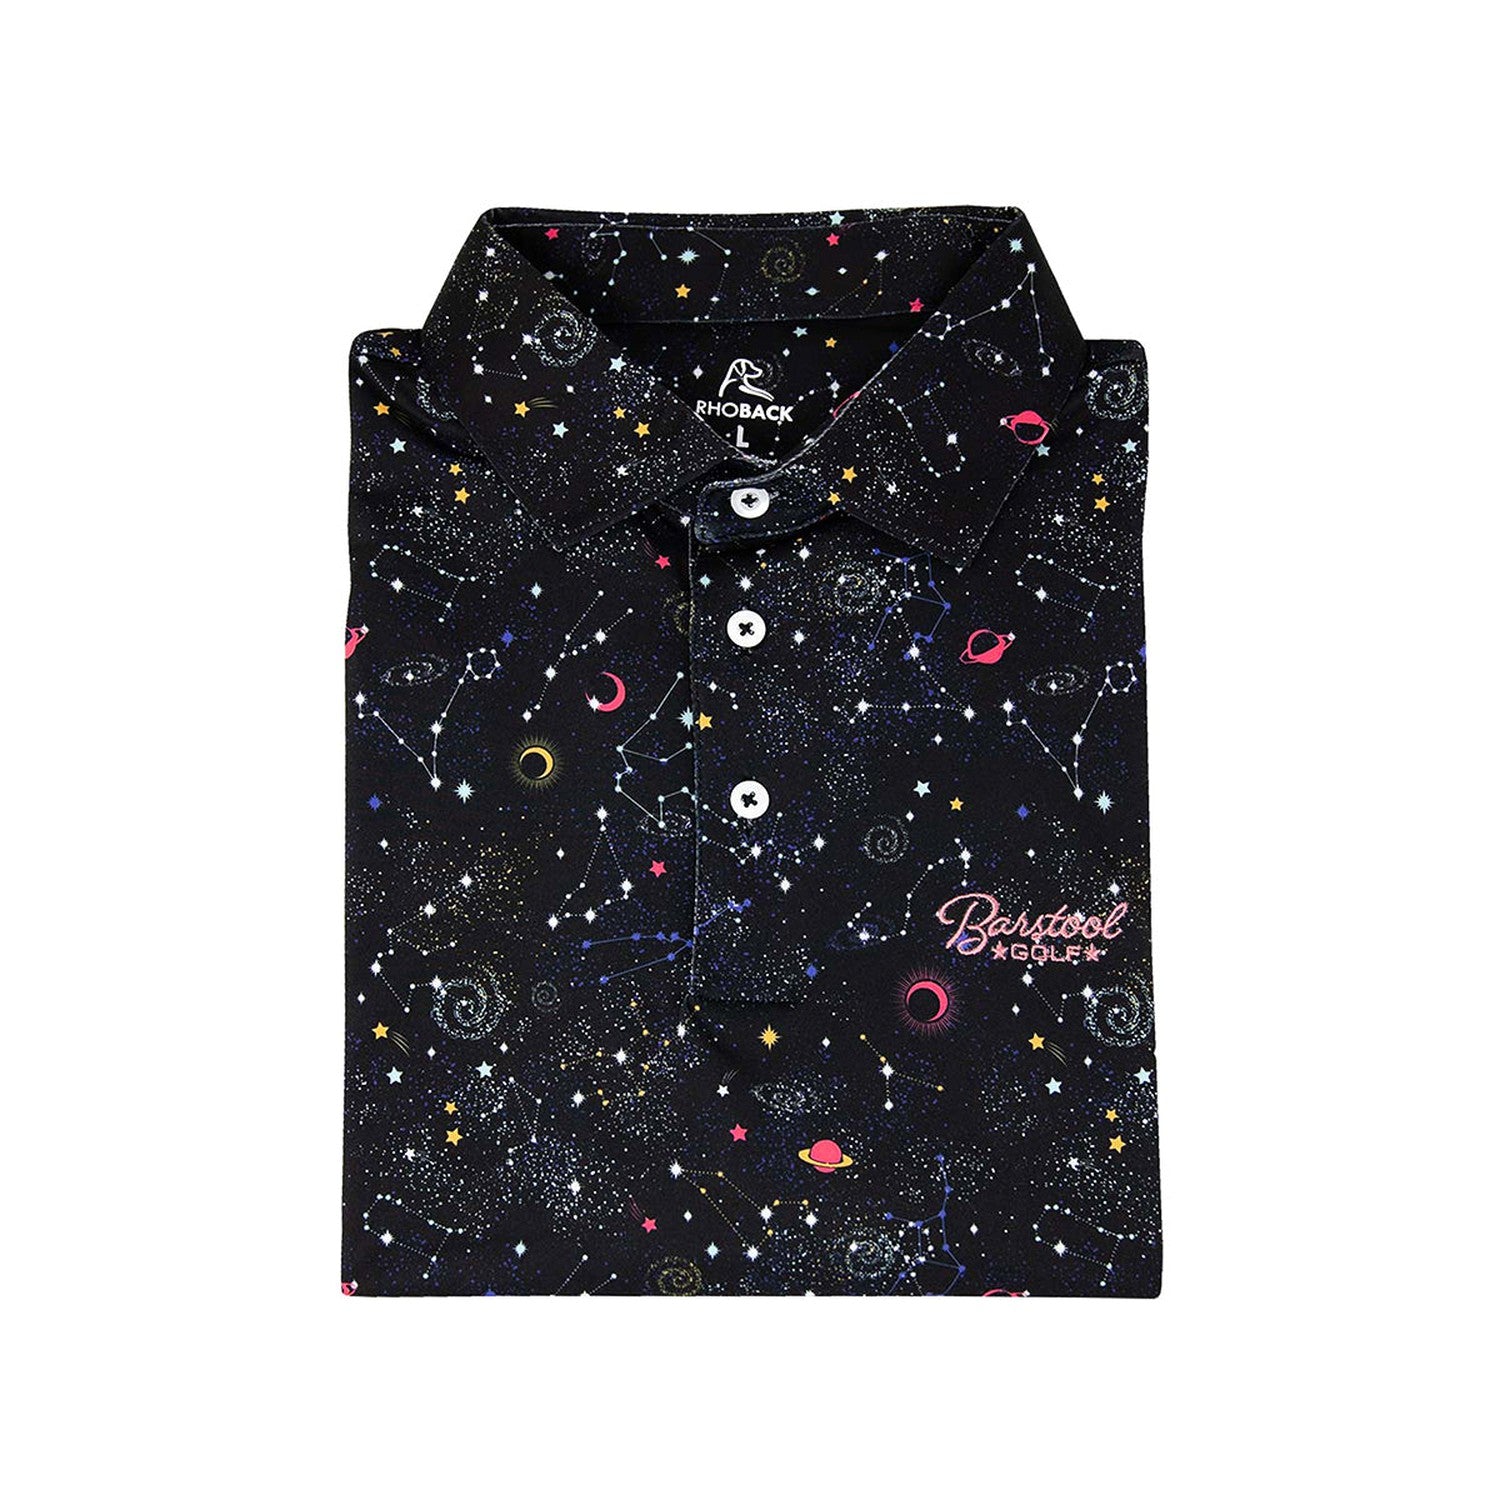 Rhoback x Barstool Golf "The Space Shirt" Toddler Polo